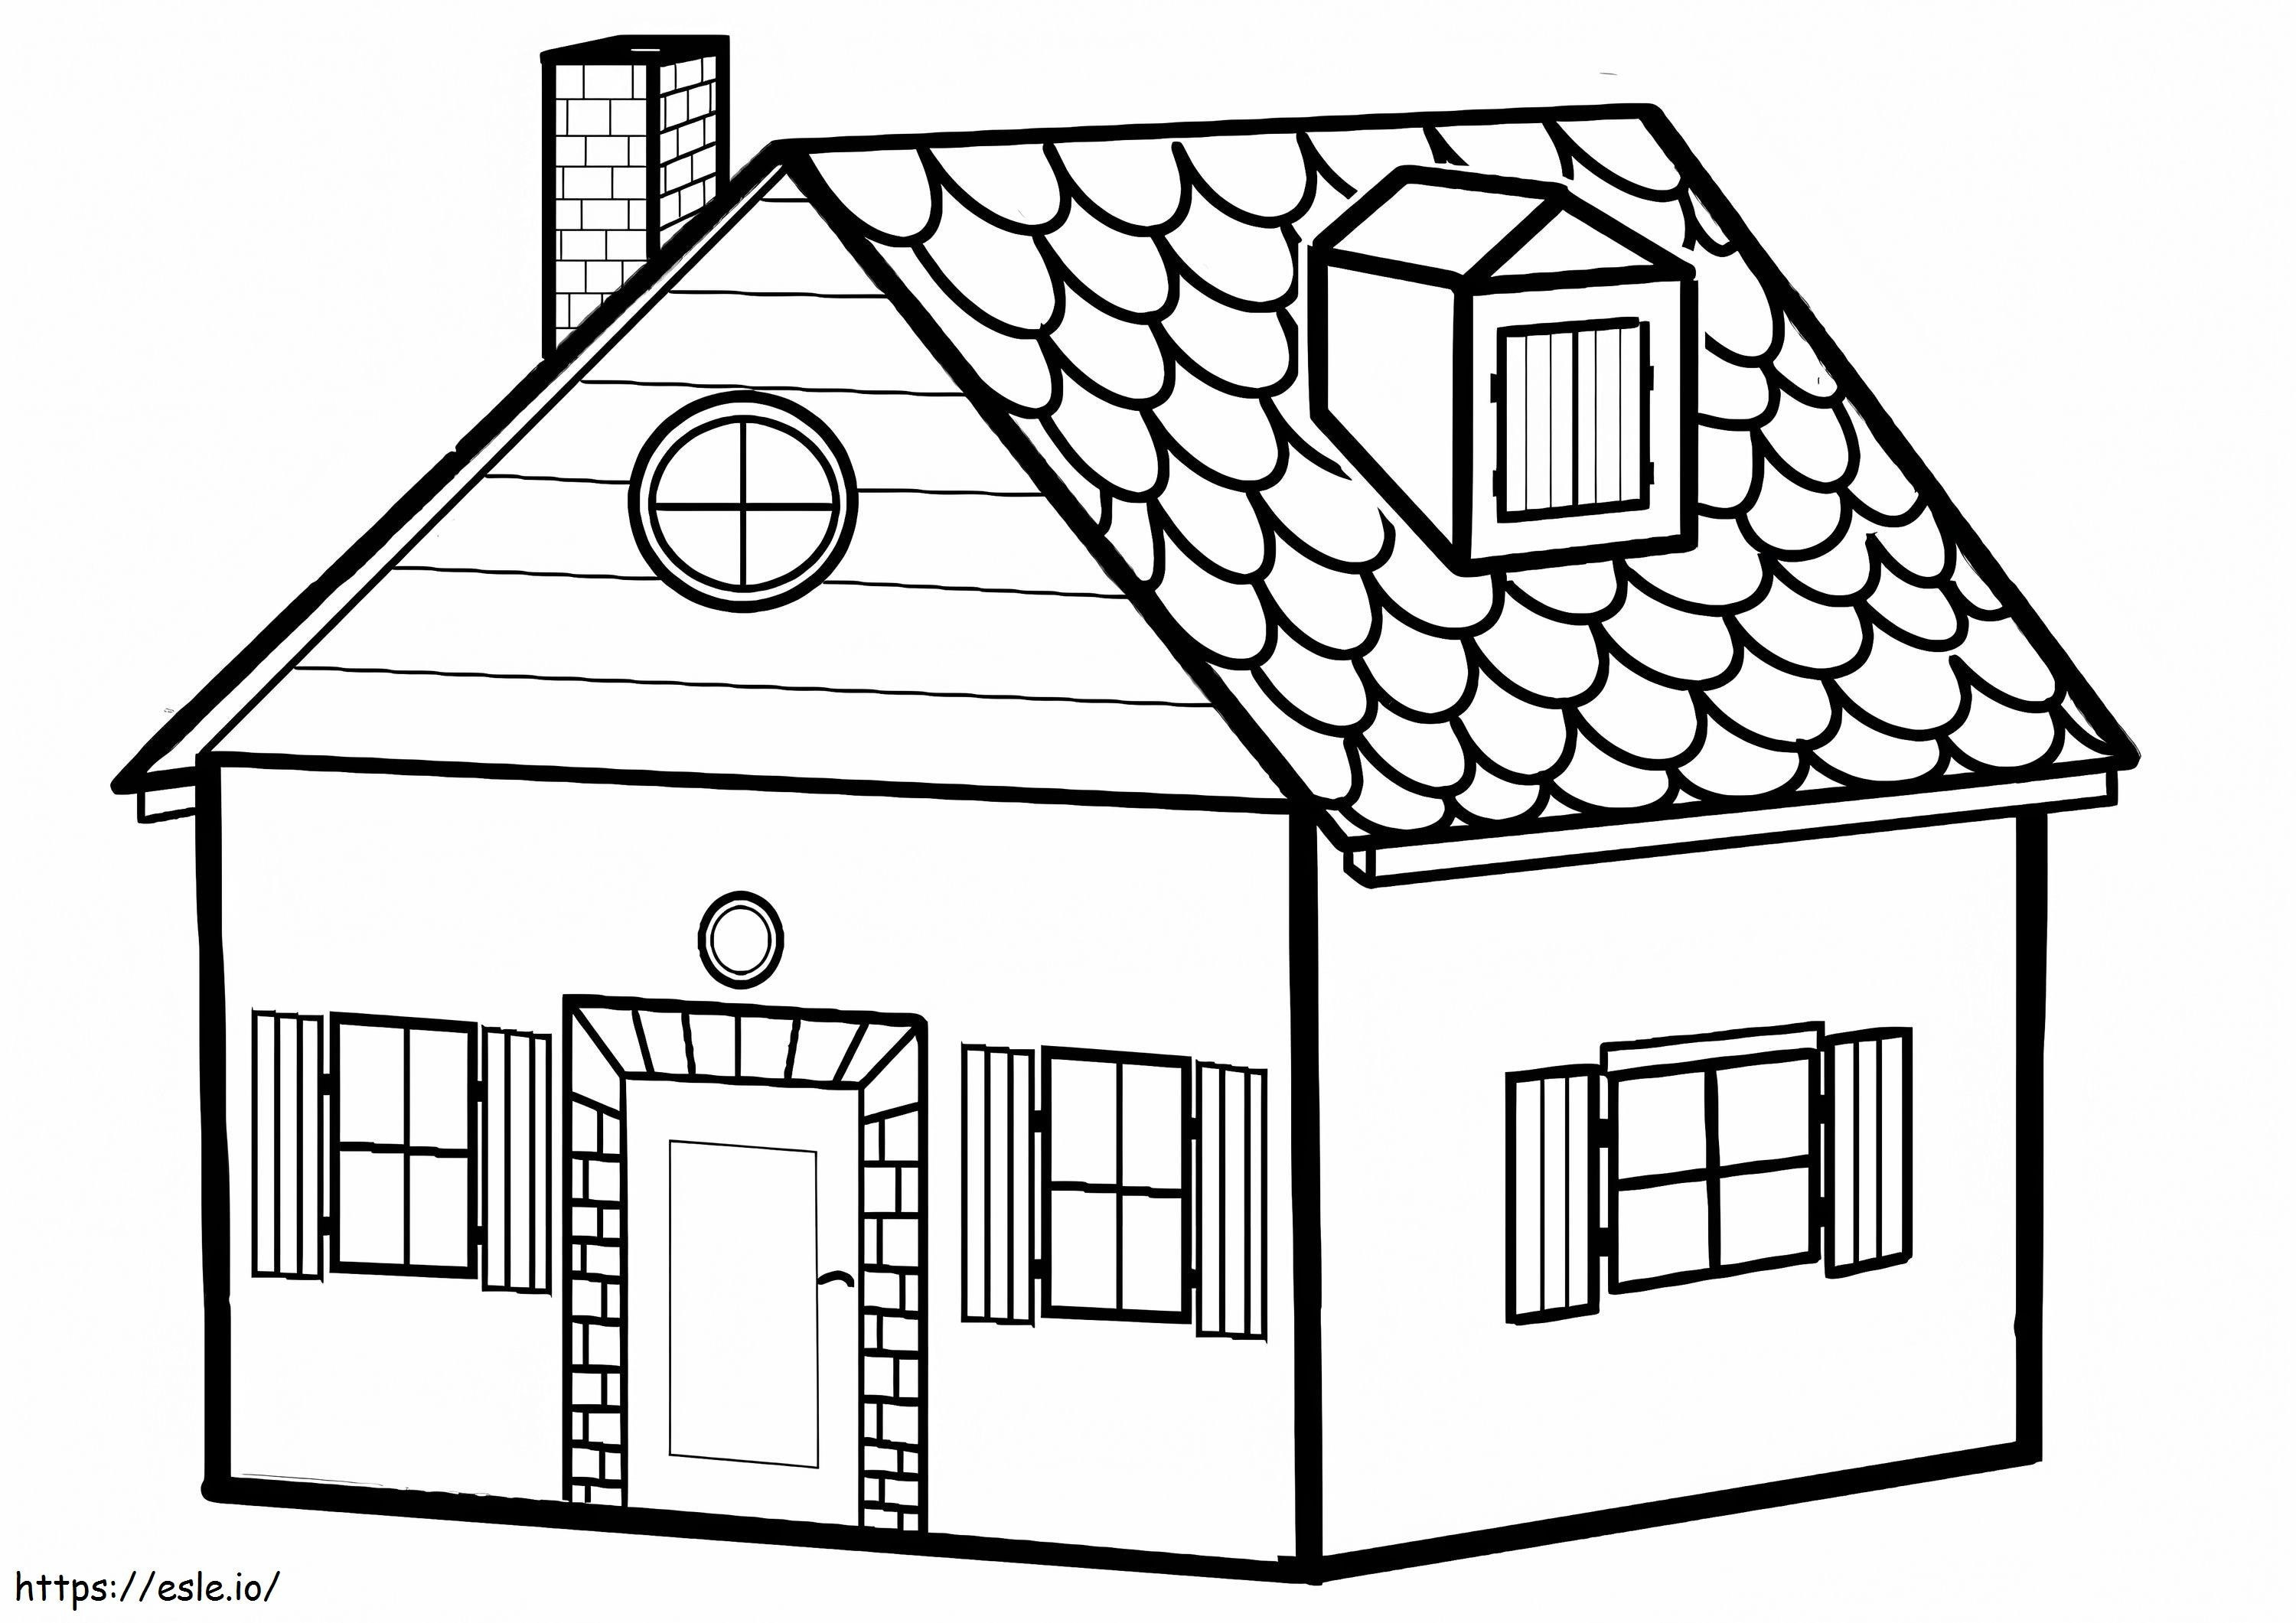 Children'S House coloring page